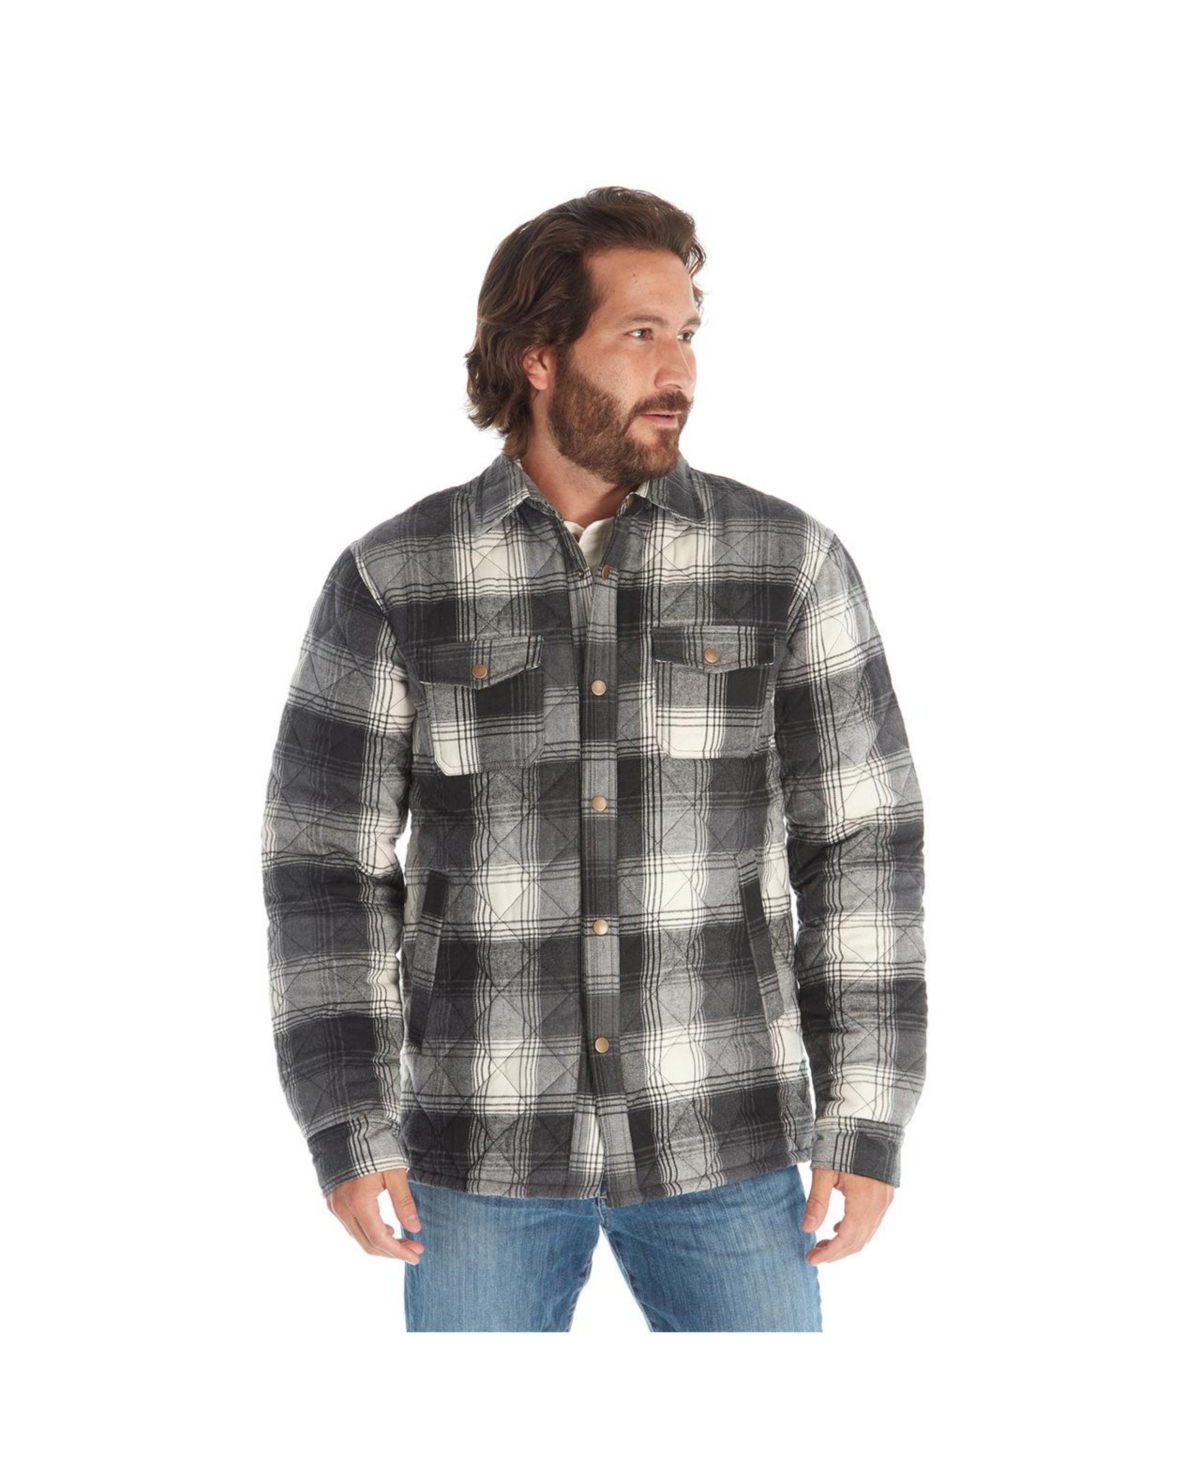 Clothing Men's Heavy Quilted Plaid Shirt Jacket - Black